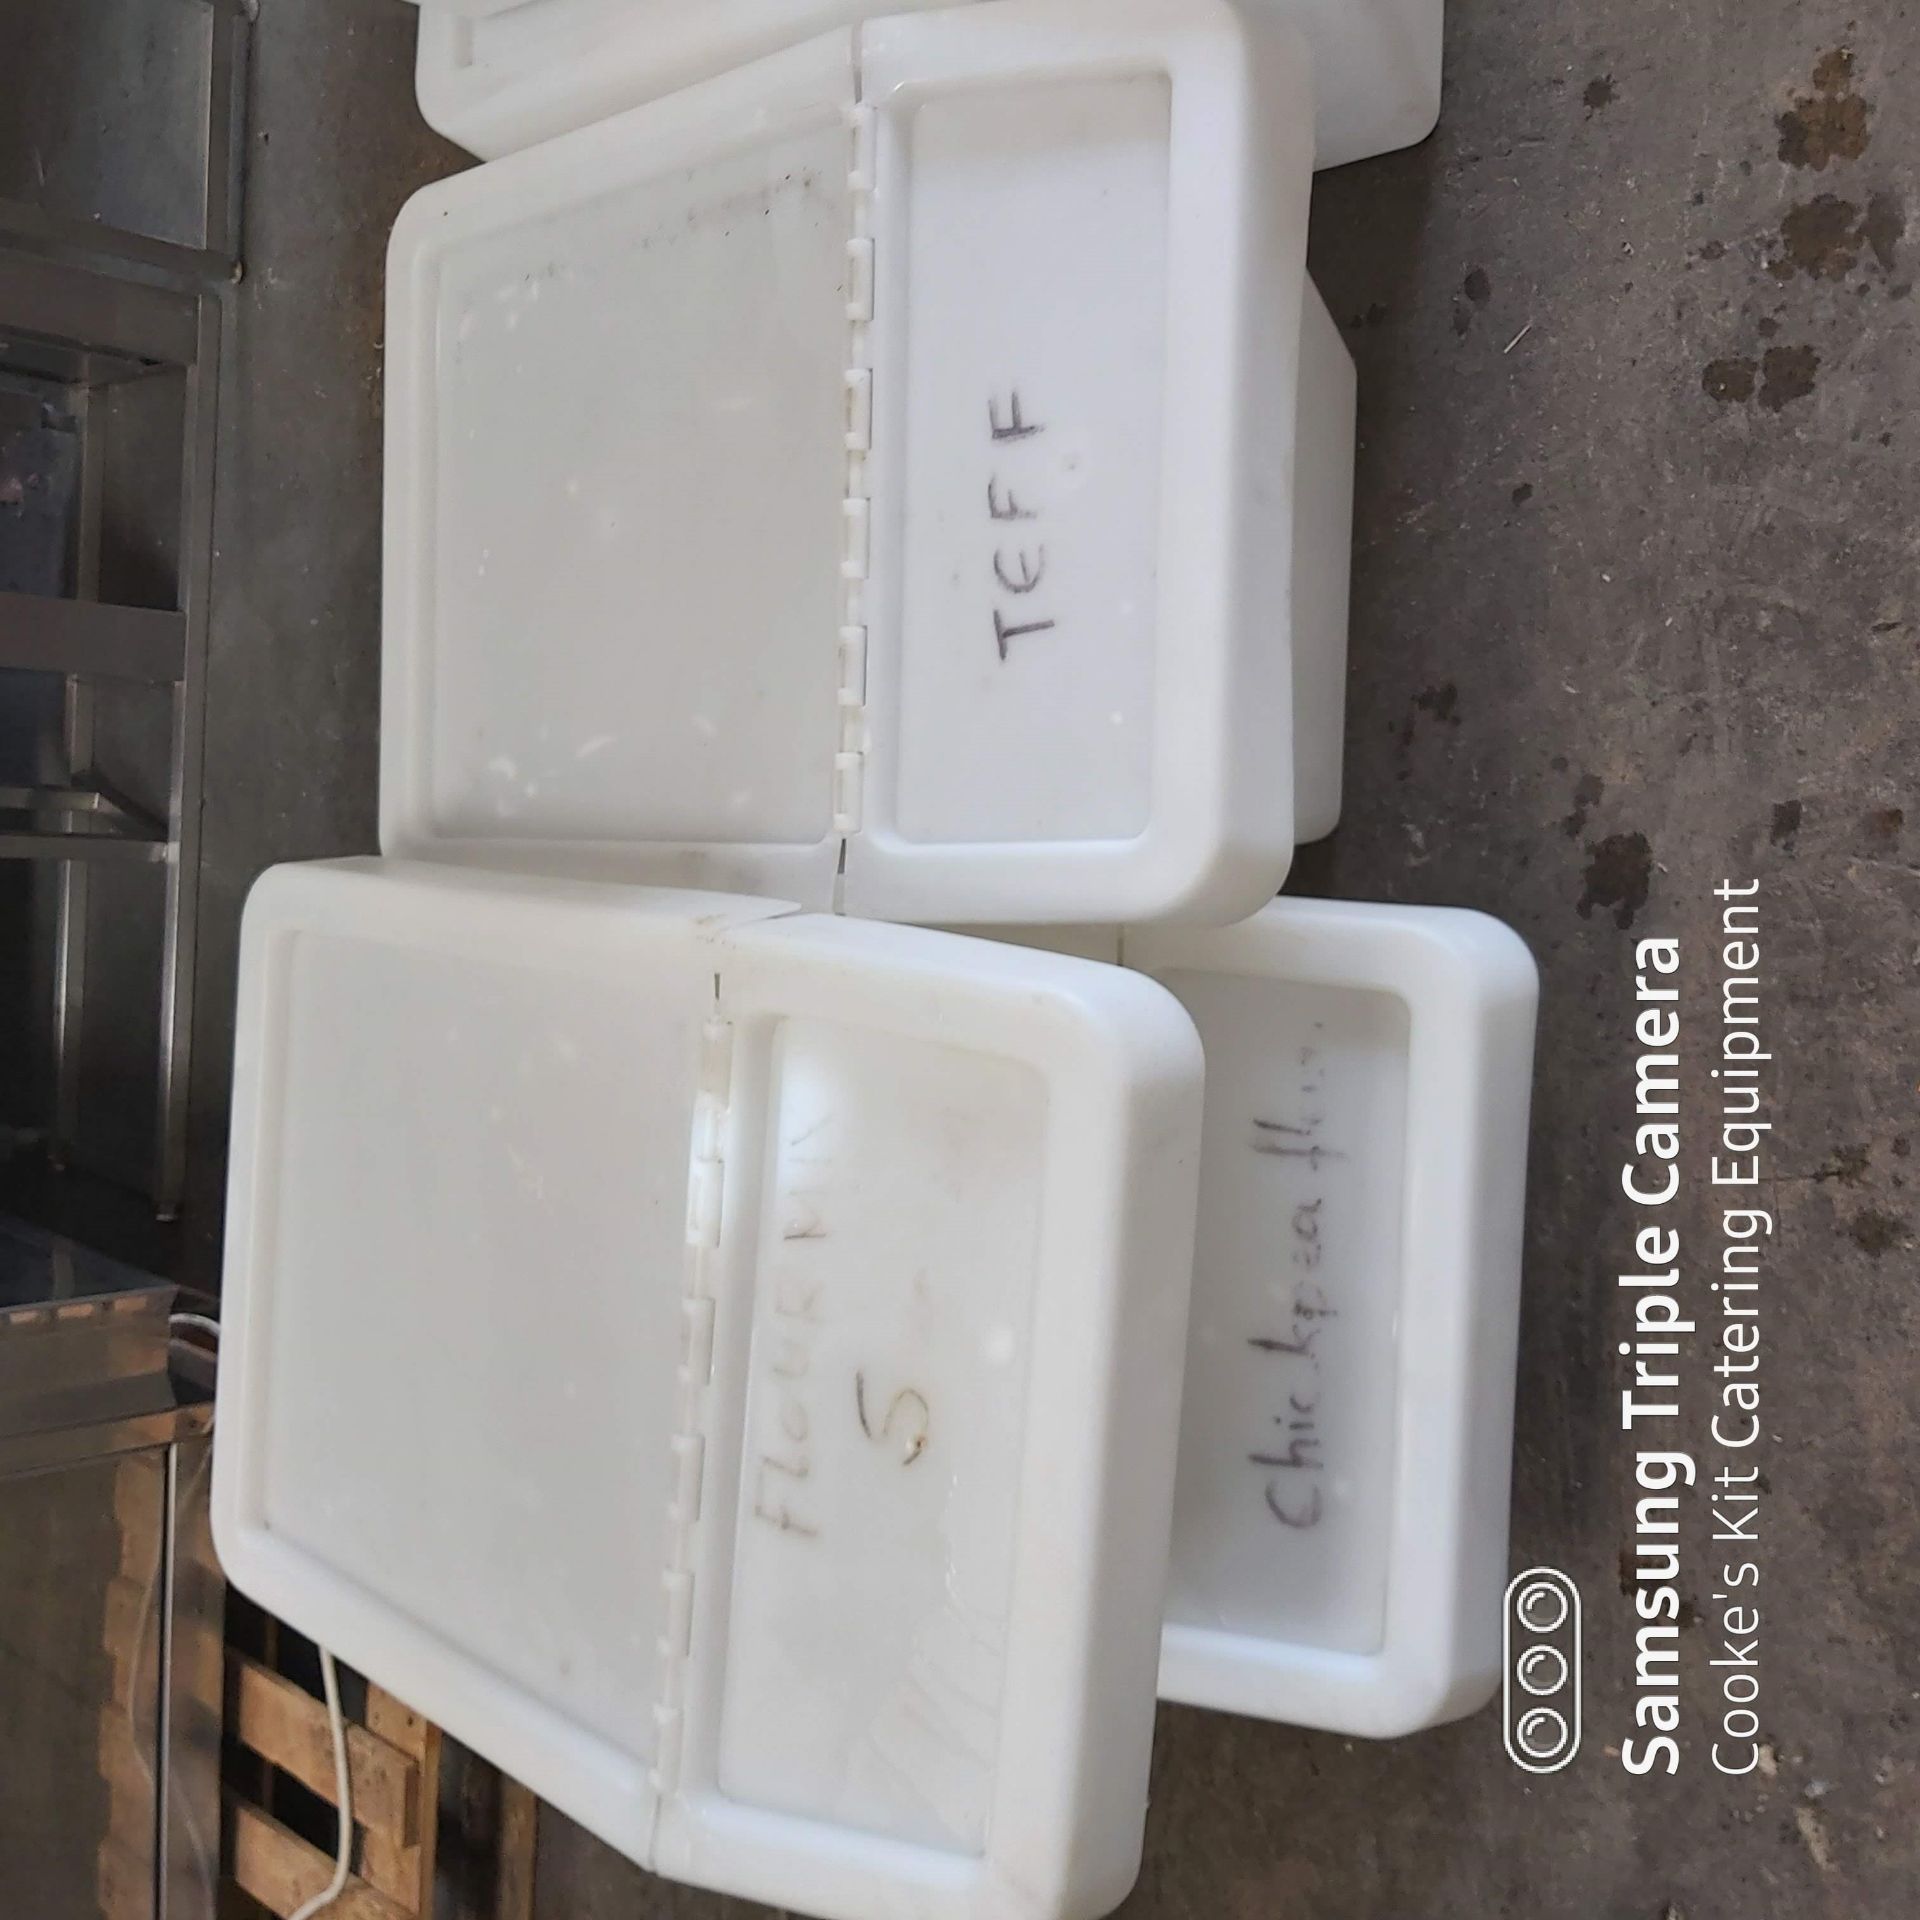 Flour Storage Containers - Image 2 of 2